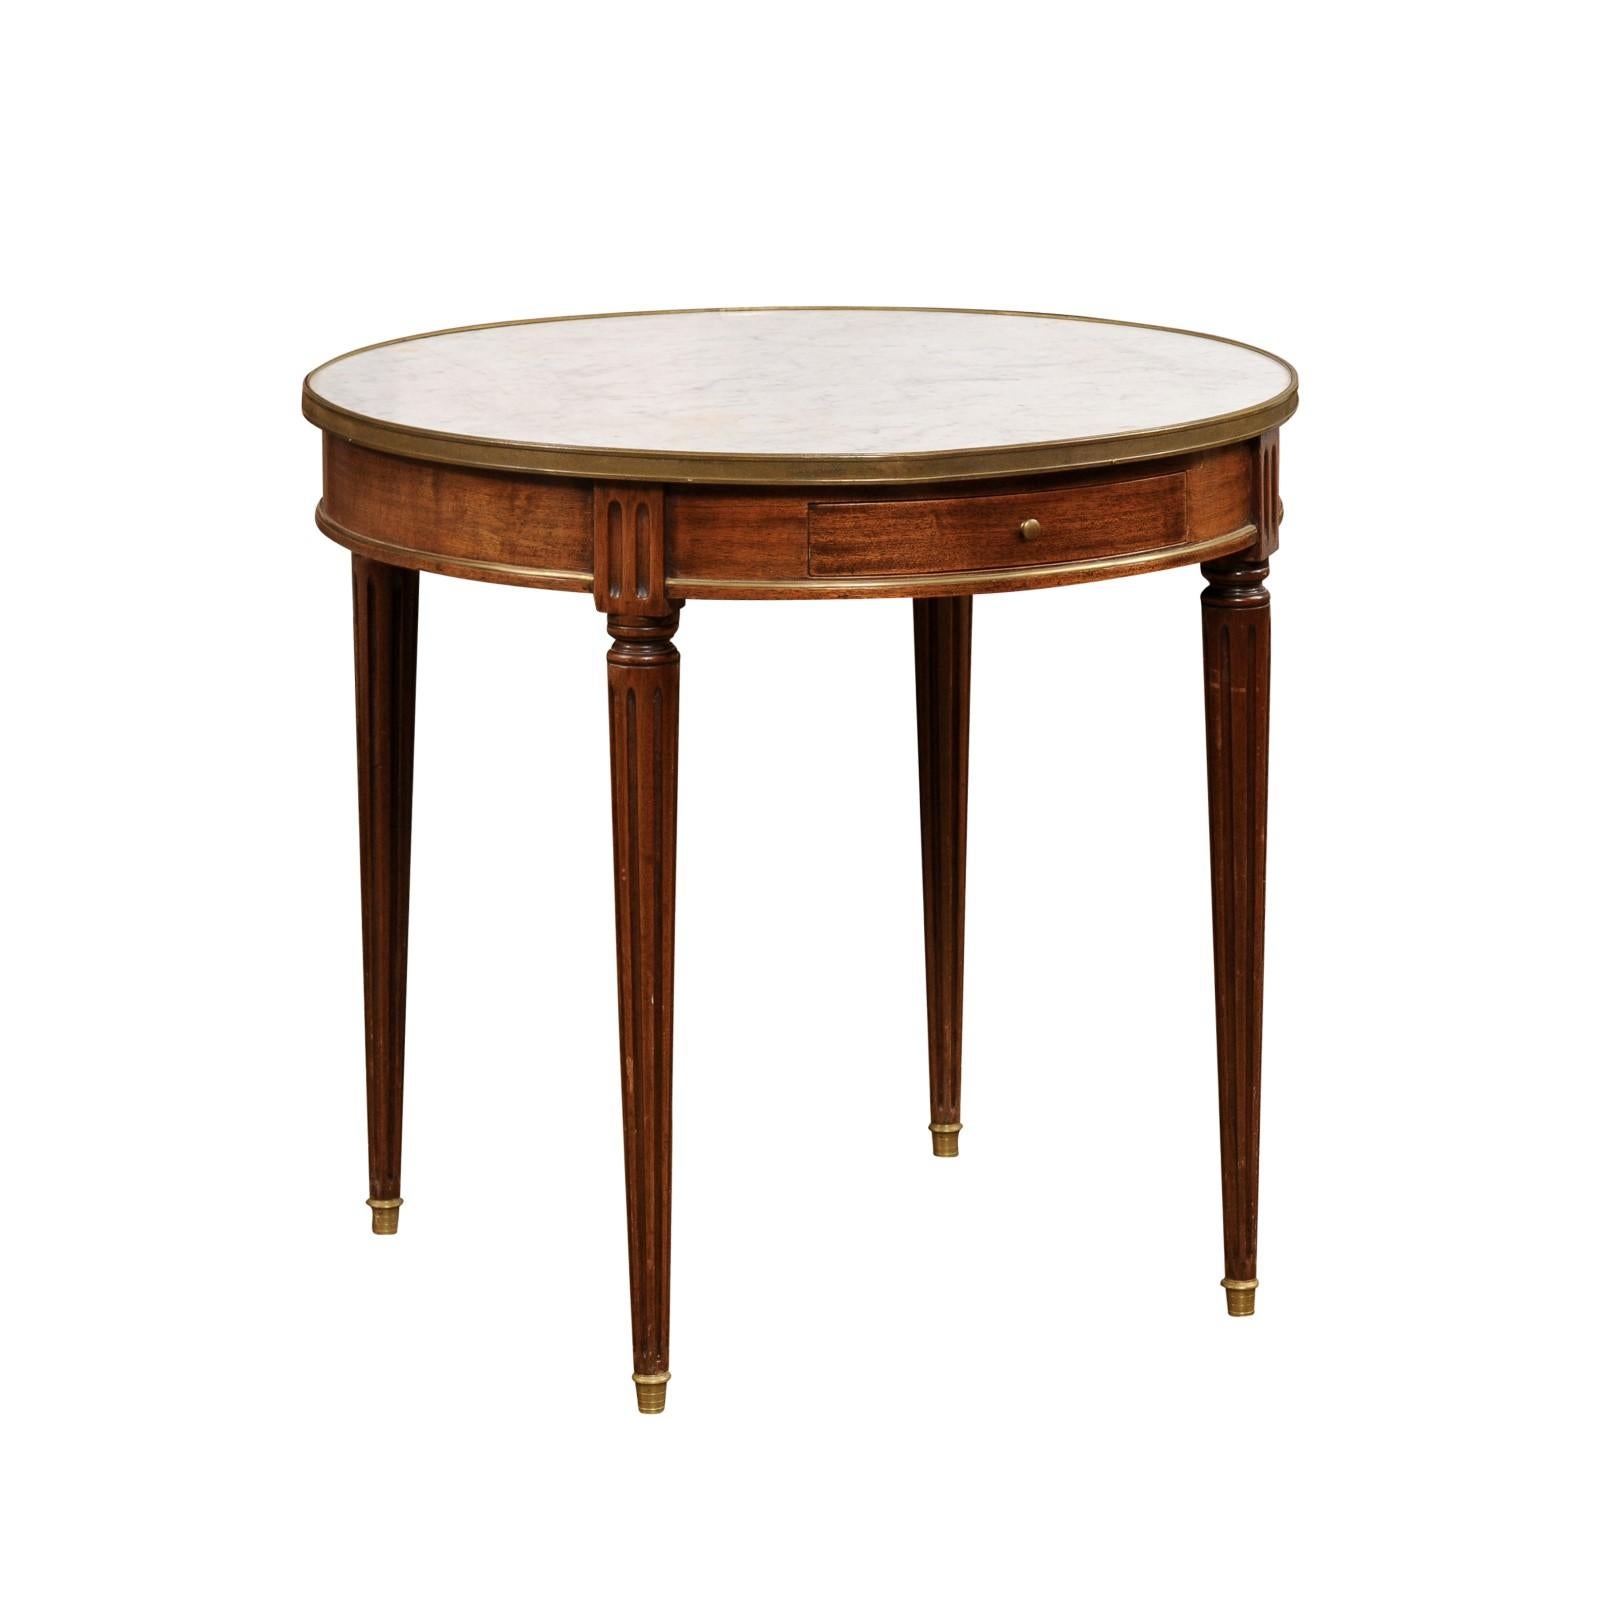 A French Louis XVI style walnut bouillotte table from the 19th century with white marble top, brass accents, single drawer and fluted legs. Created in France during the 19th century, this elegant walnut bouillotte table features a circular white